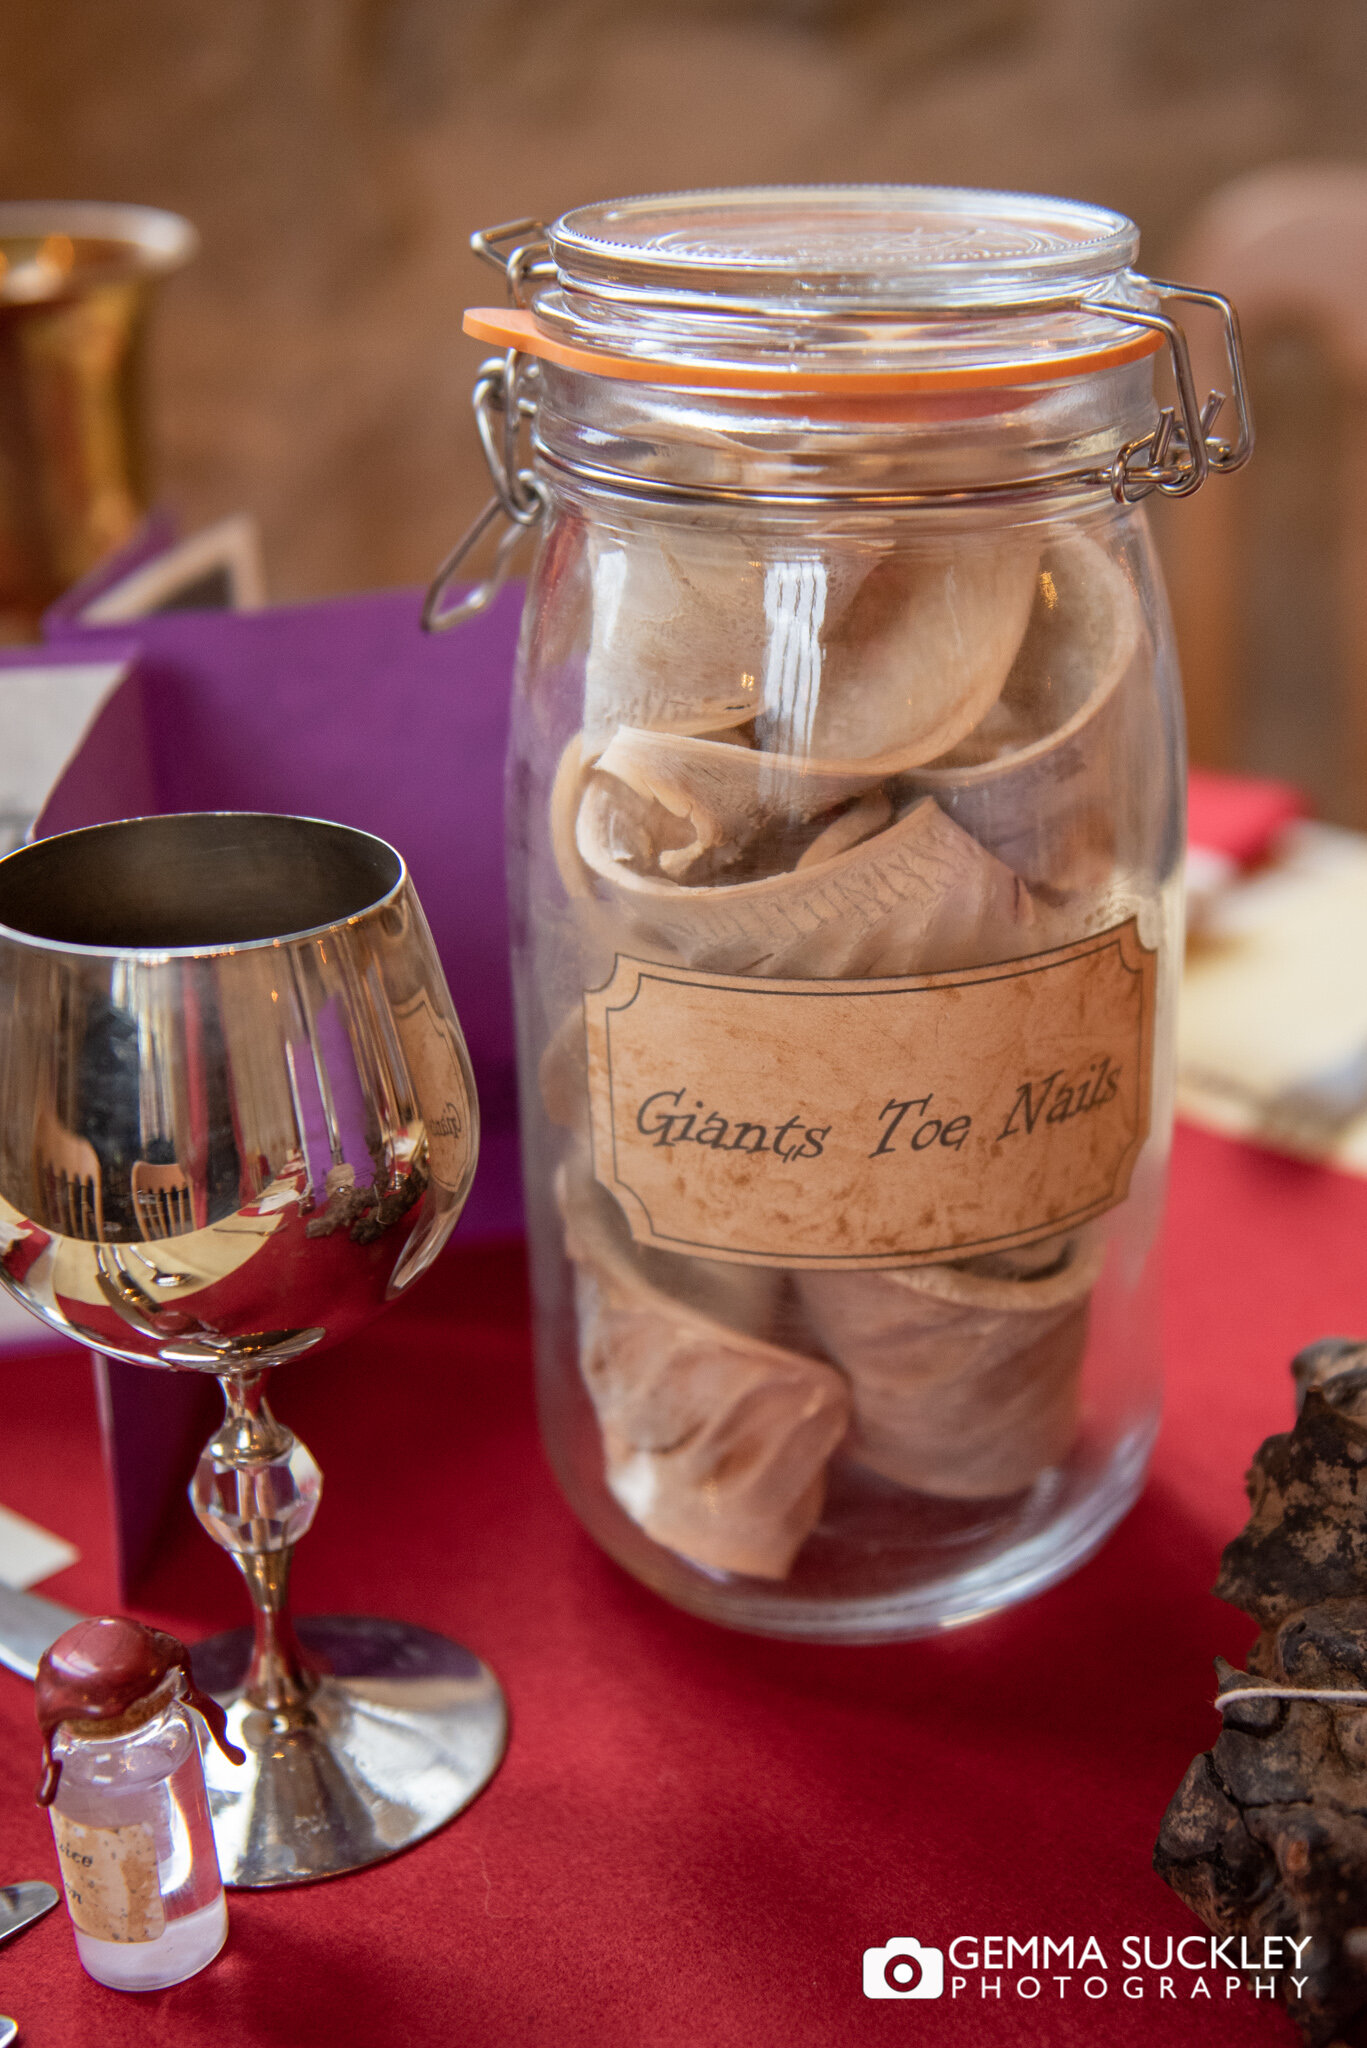 a jar of giant toe nails at a harry potter wedding